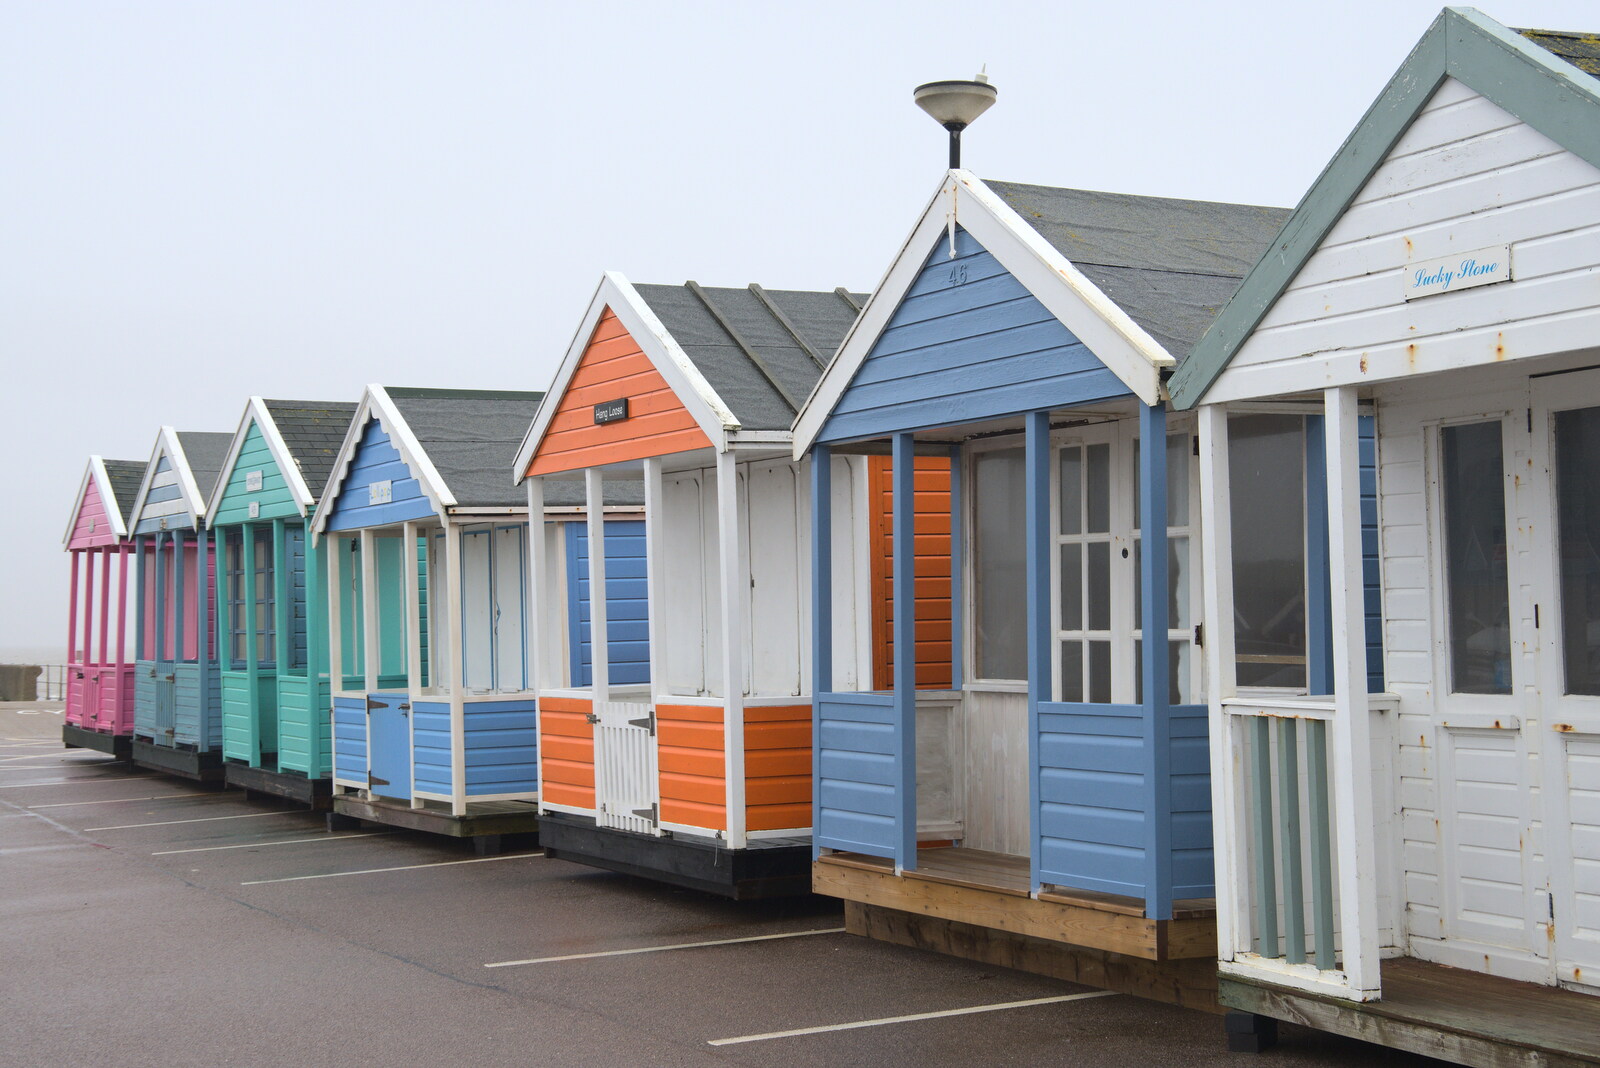 More beach huts wintering in the car park from A Few Hours at the Seaside, Southwold, Suffolk - 27th December 2021